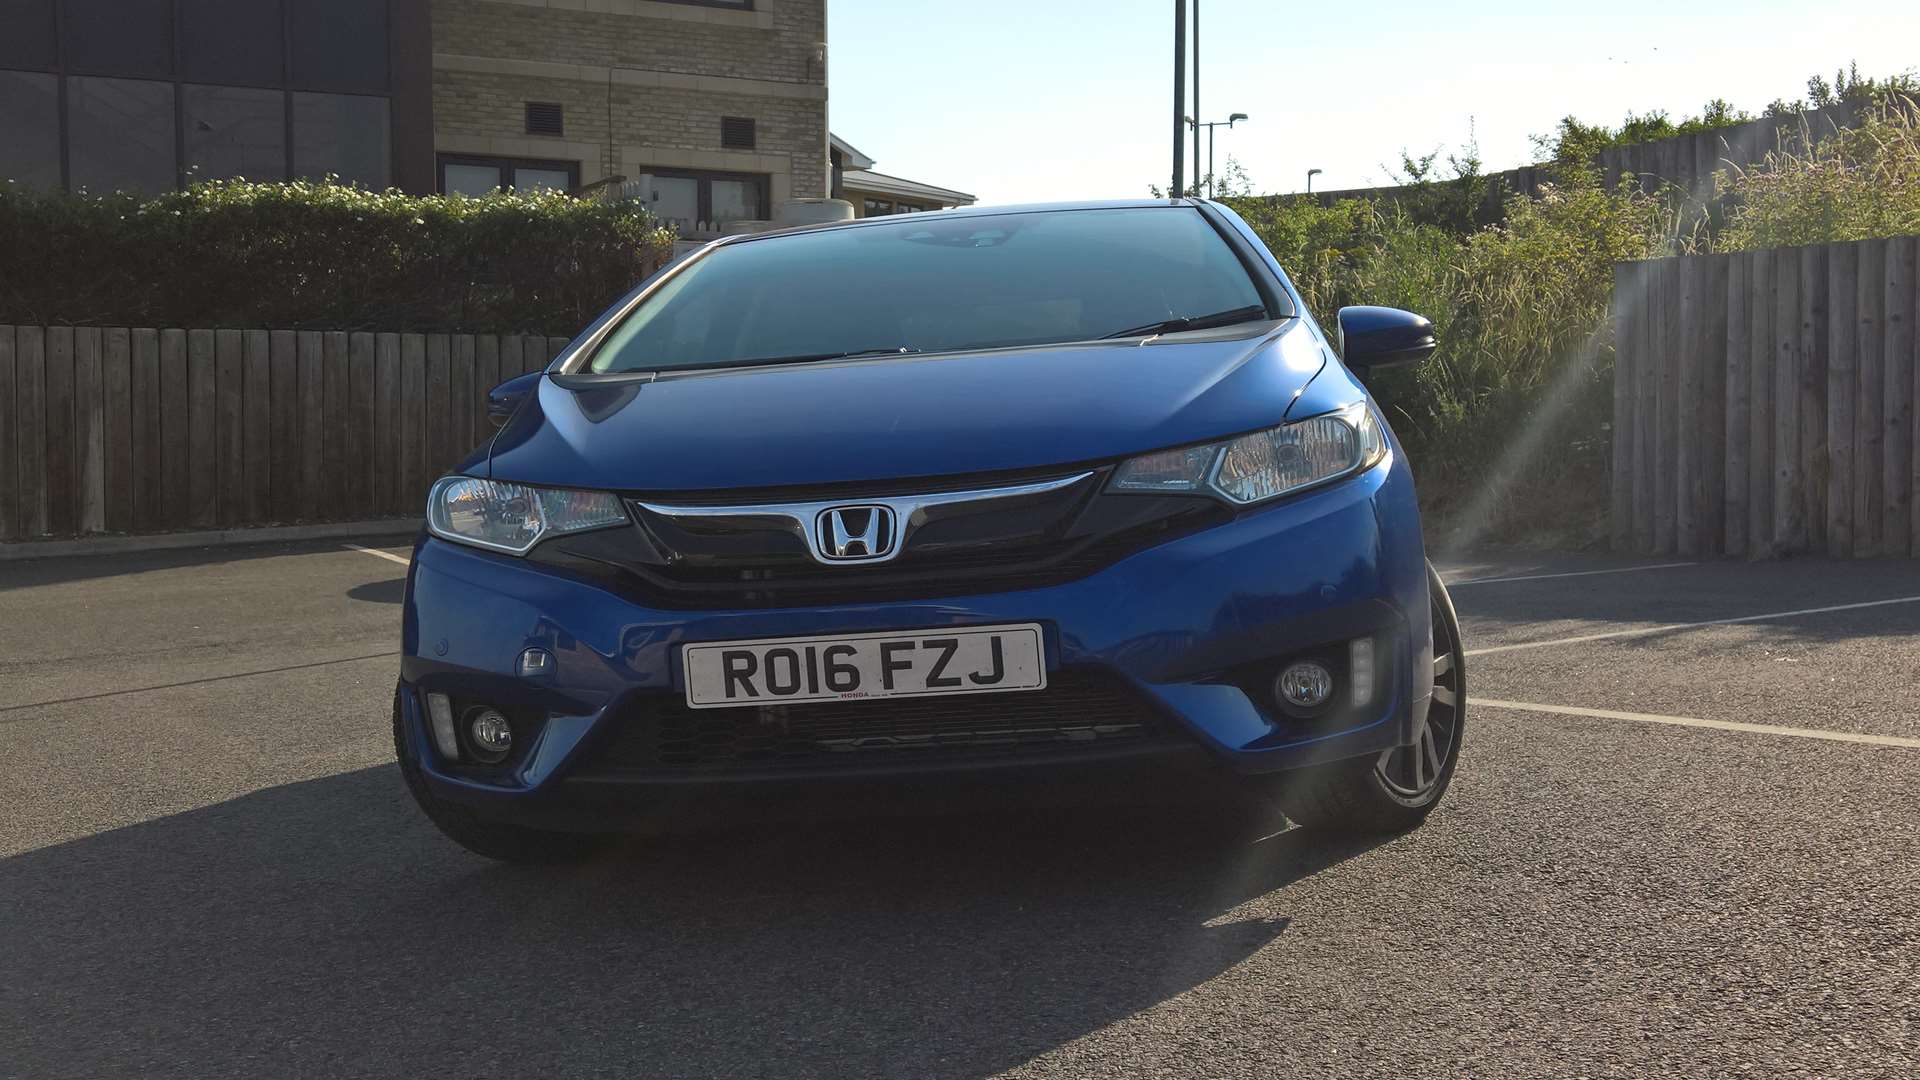 The front shares styling cues with the HR-V